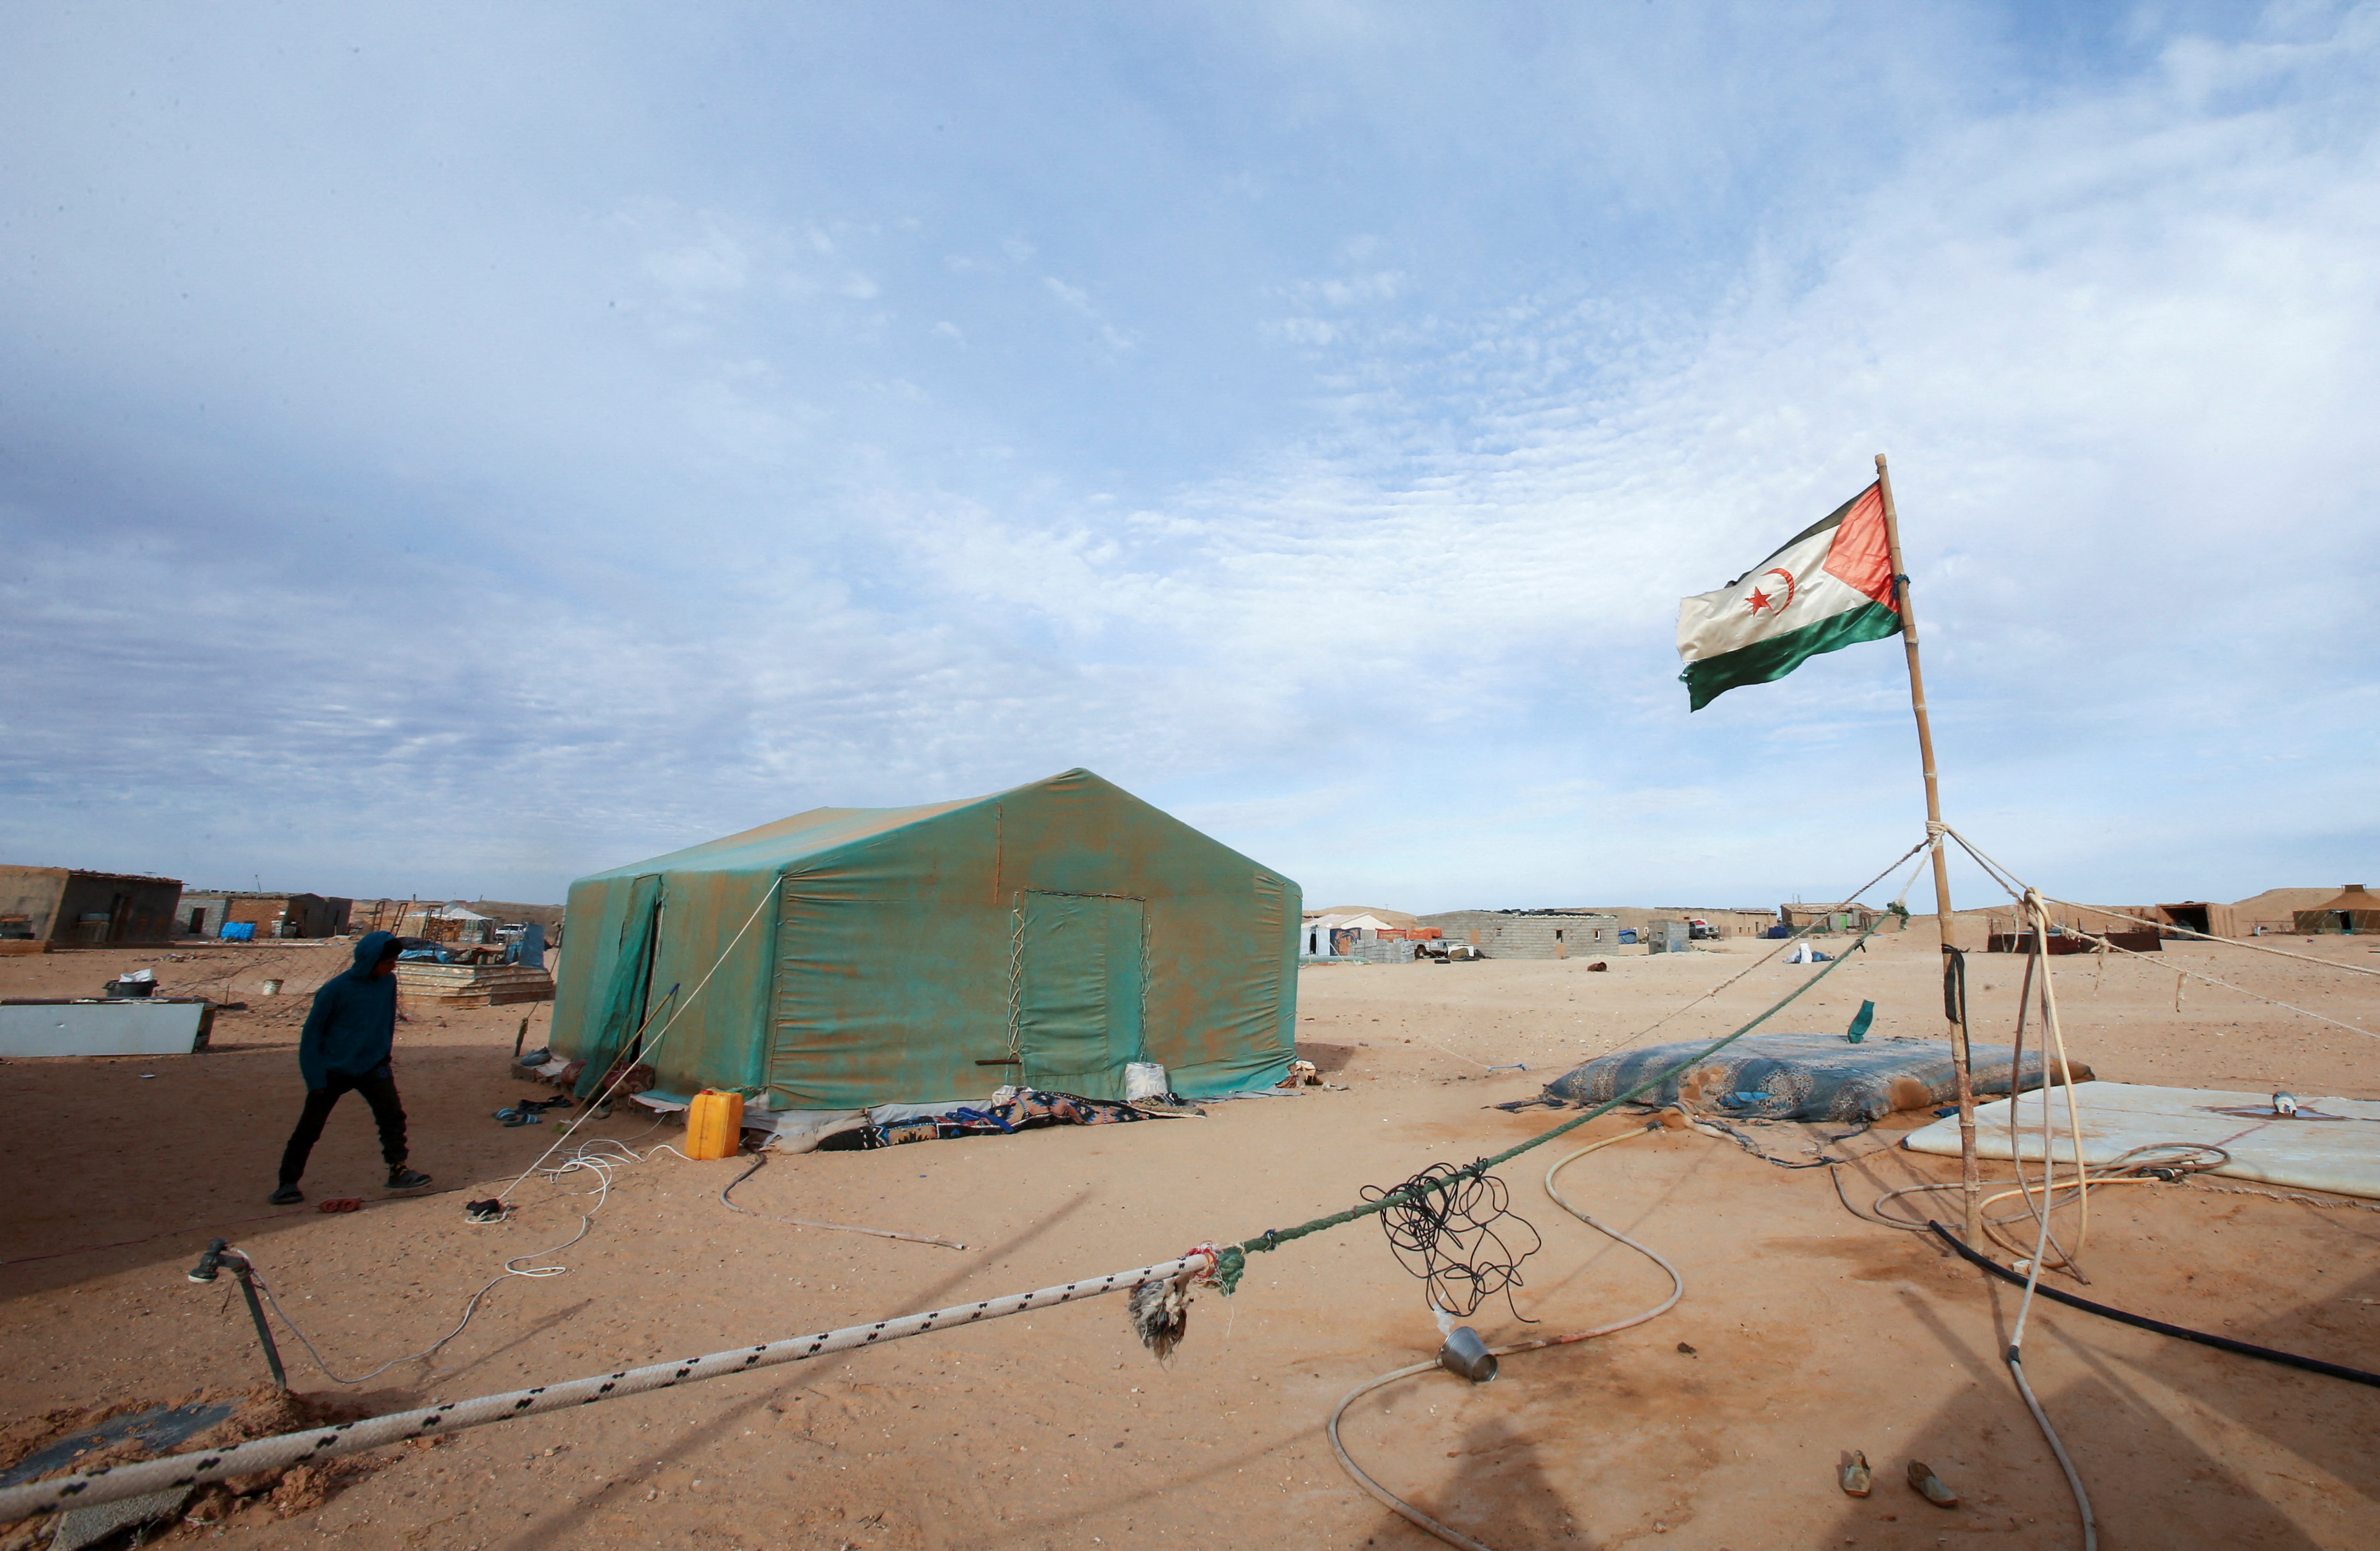 A person walks past tents at a Sahrawi refugee camp in Tindouf